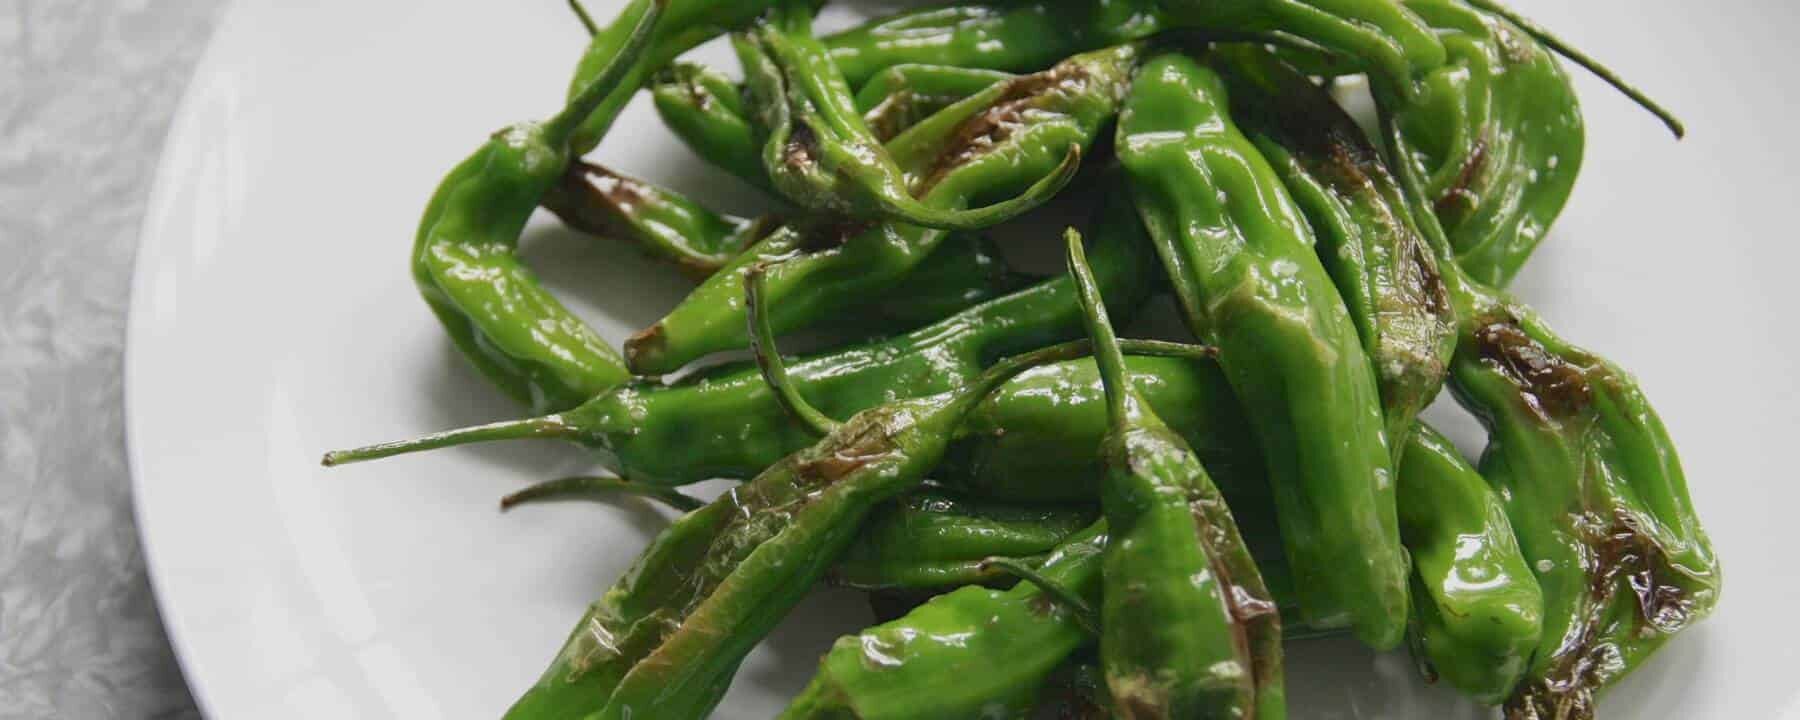 CARE Recipe: Quick-fried Shishito Peppers (Japanese Pub Food)